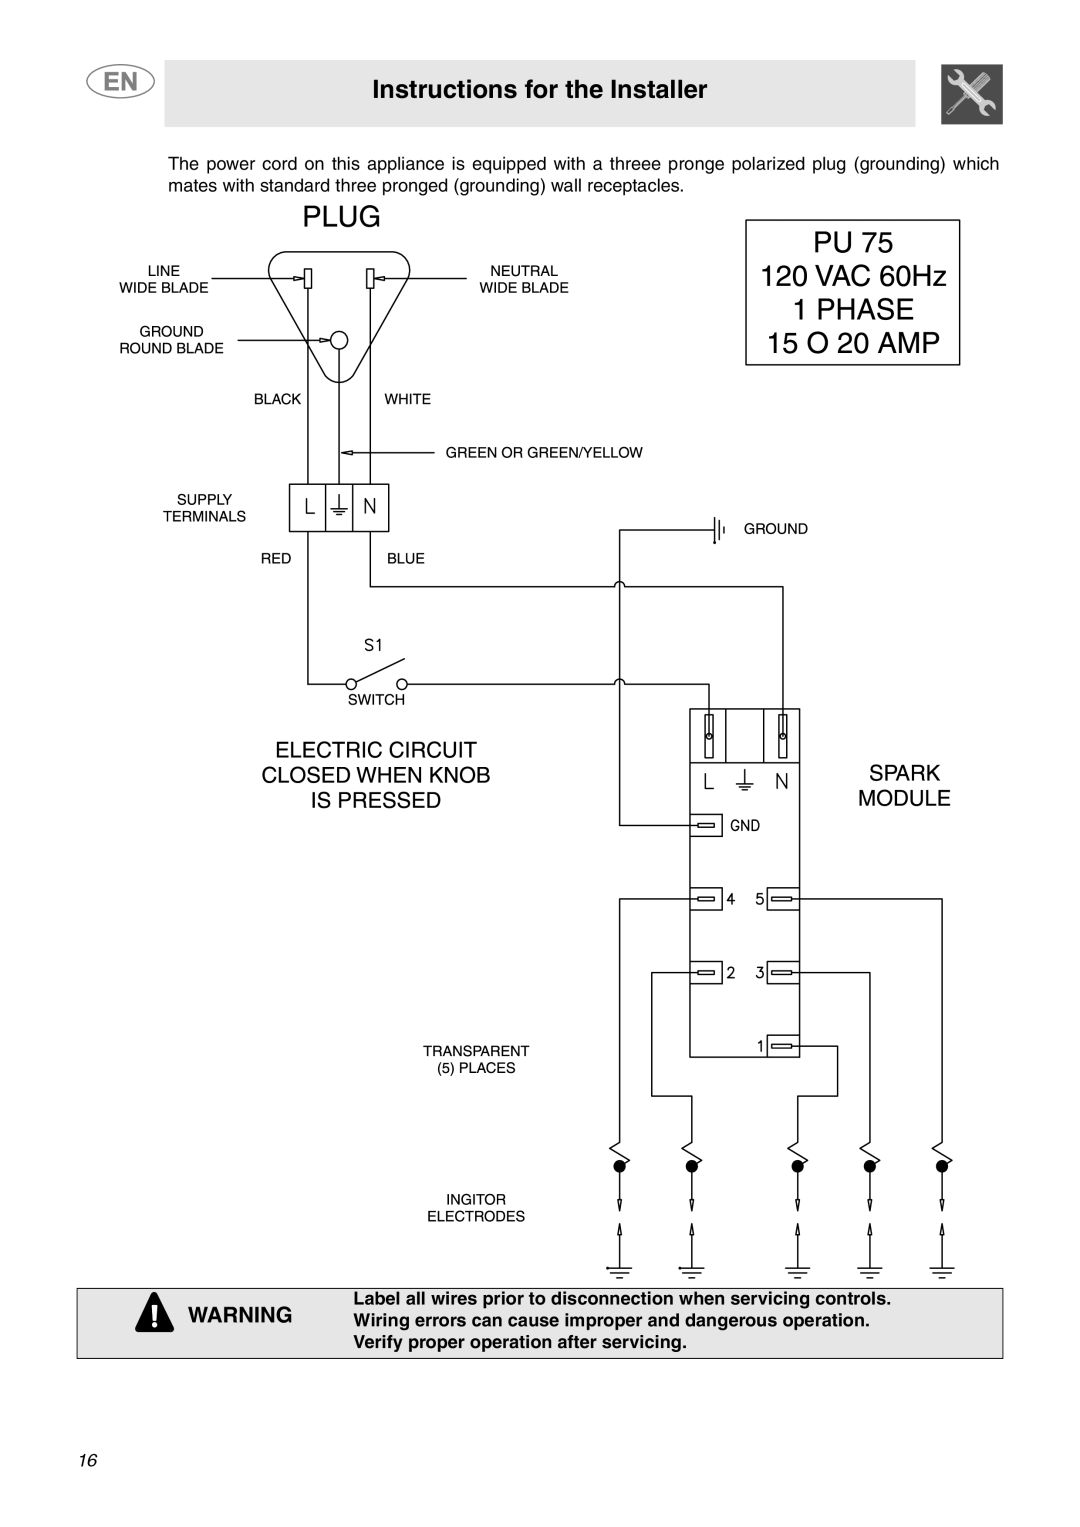 Smeg PU106 Gas, PU75, PU64 Instructions for the Installer, Label all wires prior to disconnection when servicing controls 